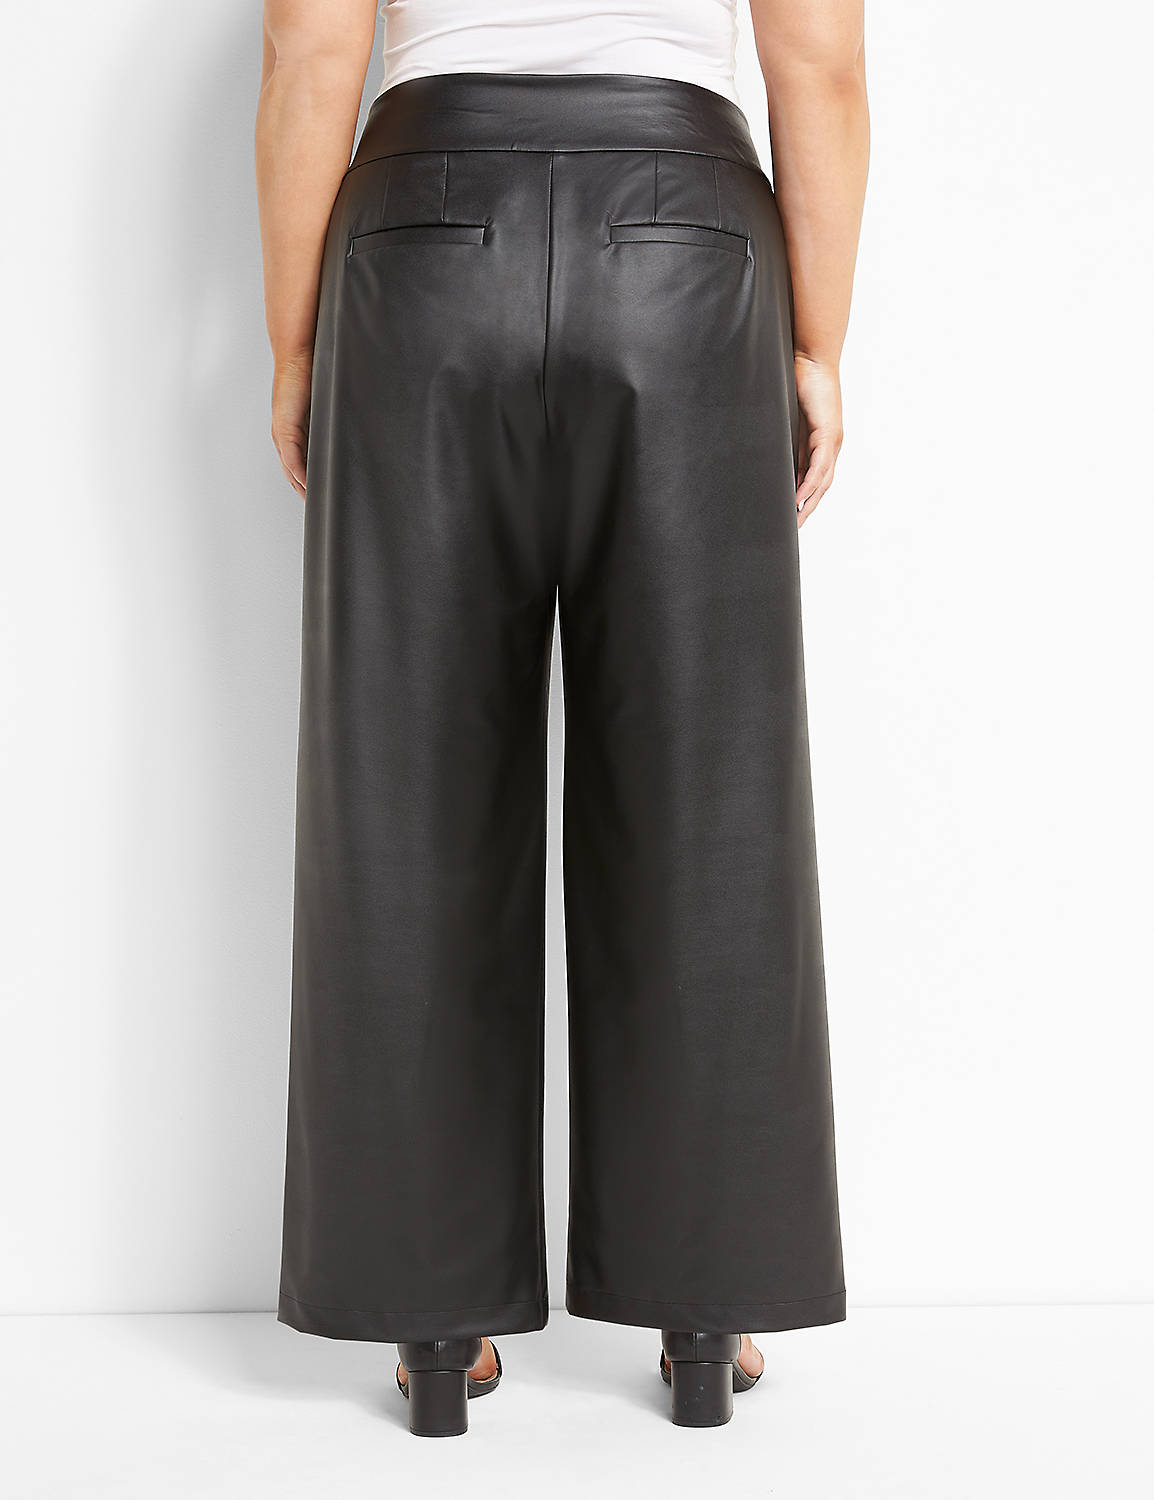 Faux Leather Wideleg 1122431 Product Image 2